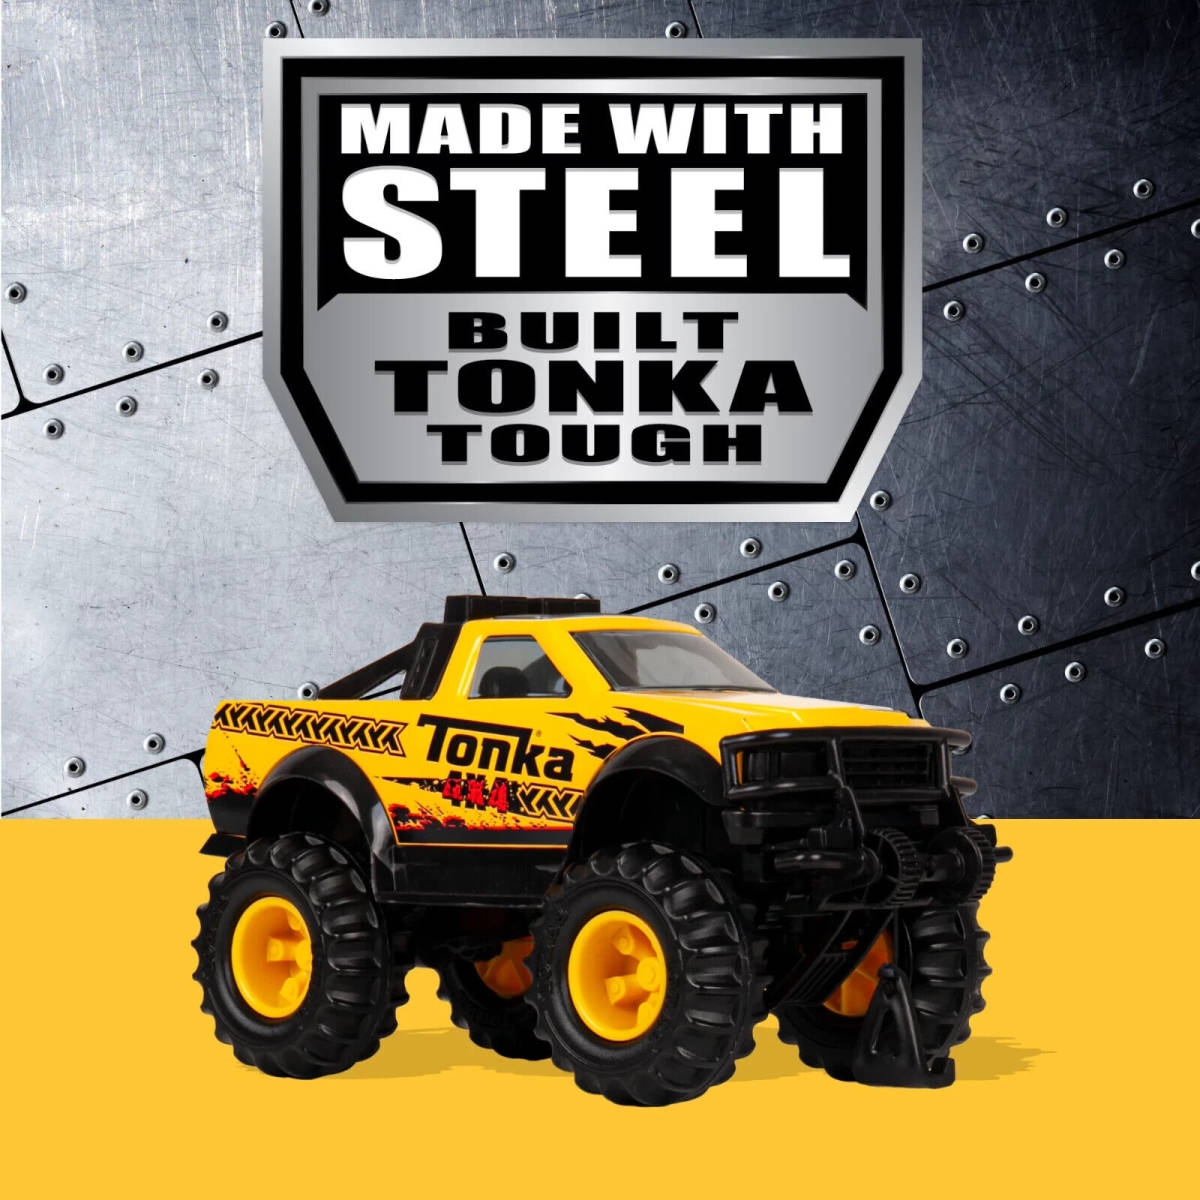 TONKA Steel Classic 4X4 Pick Up Truck Toy Gift Built Tonka tough with real steel 海外 即決